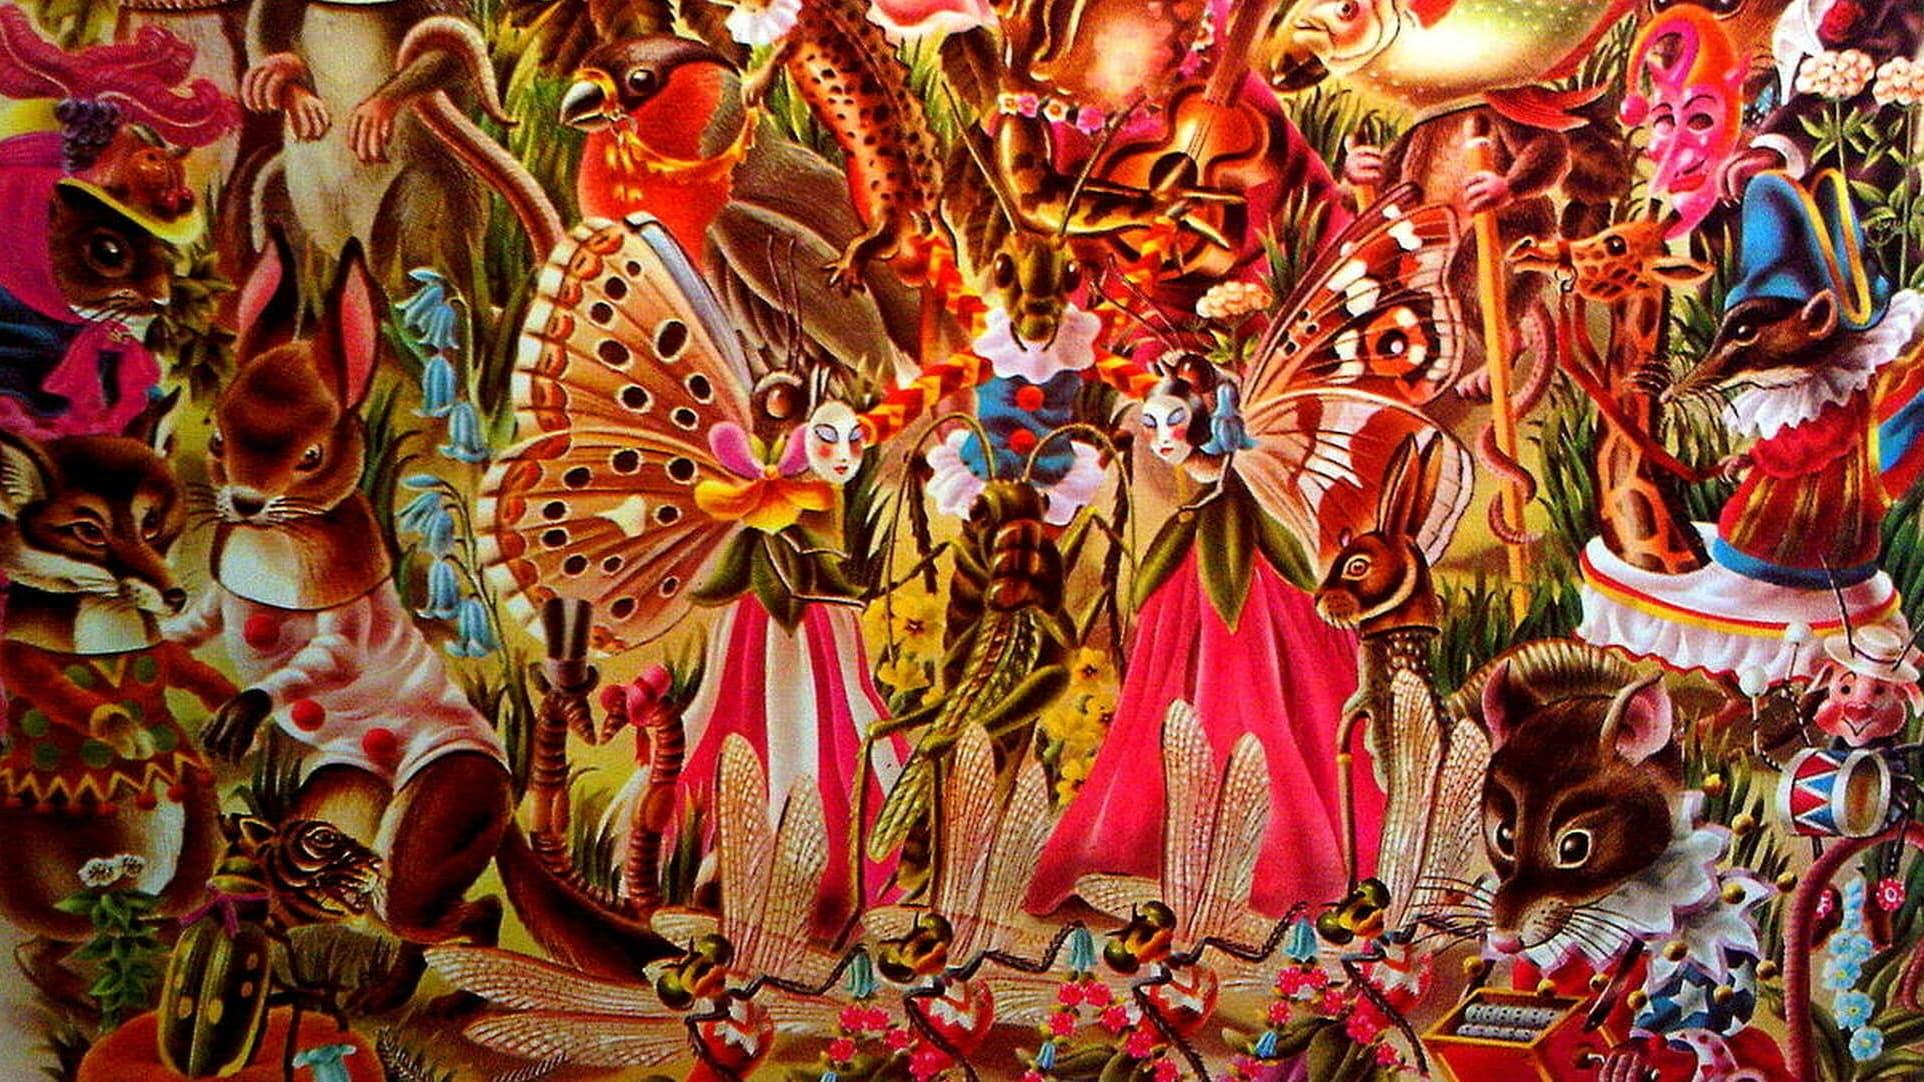 The Butterfly Ball backdrop